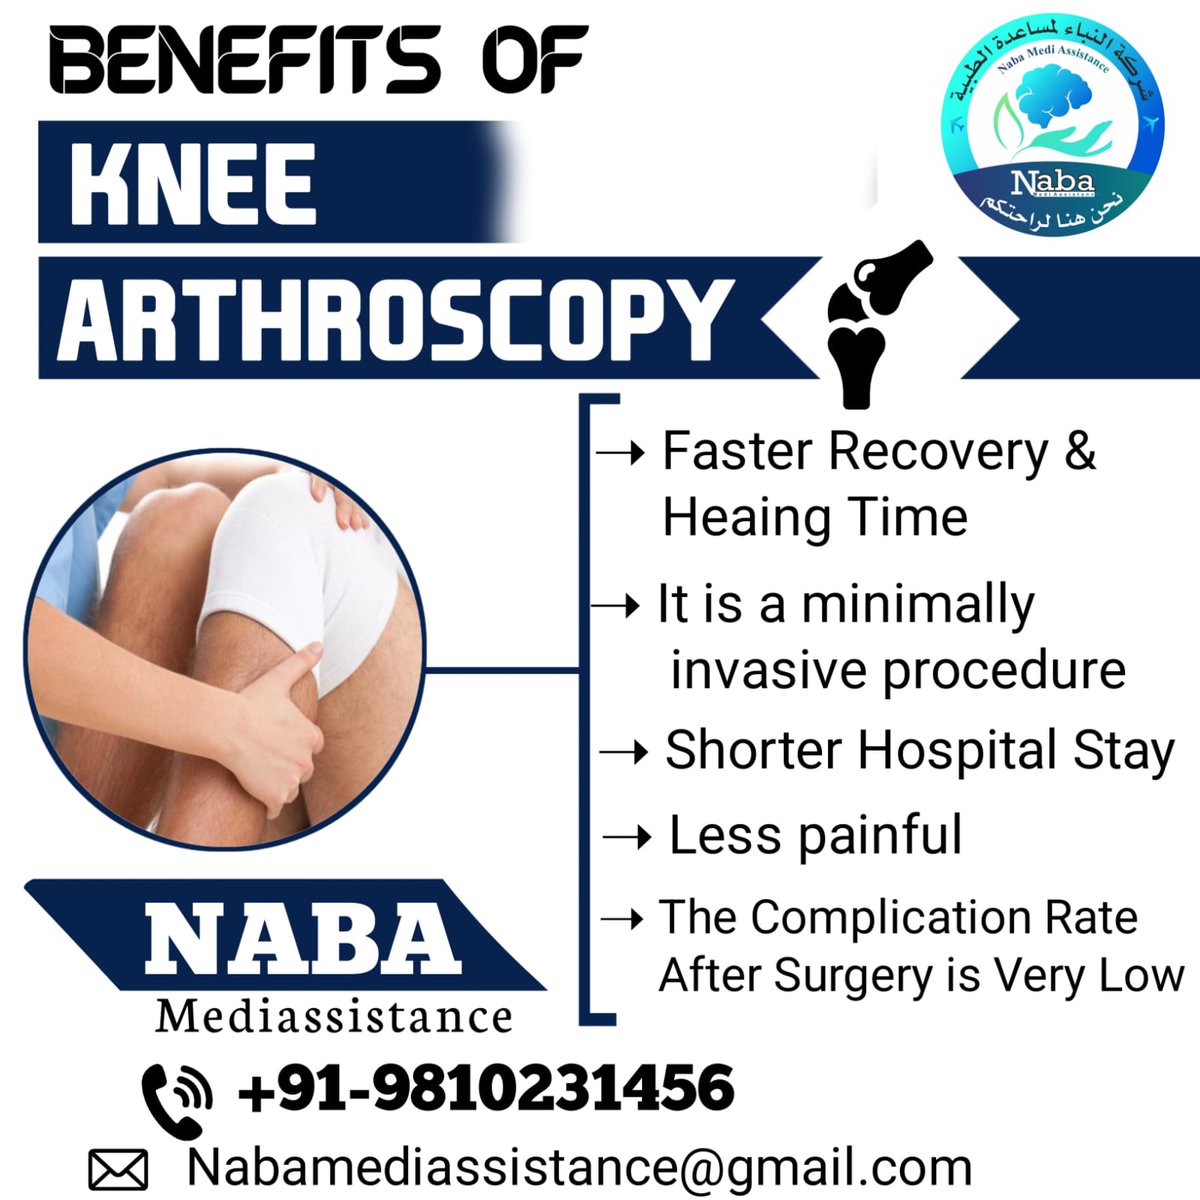 Knee arthroscopy is a procedure that uses a small camera to look into your knee to check for abnormalities.
.
#nabamediassistance #kneearthritis #orthopedics #kneepain #kneereplacement #iraq #Bangladesh #surgery #medicaltourism #treatment #yemen